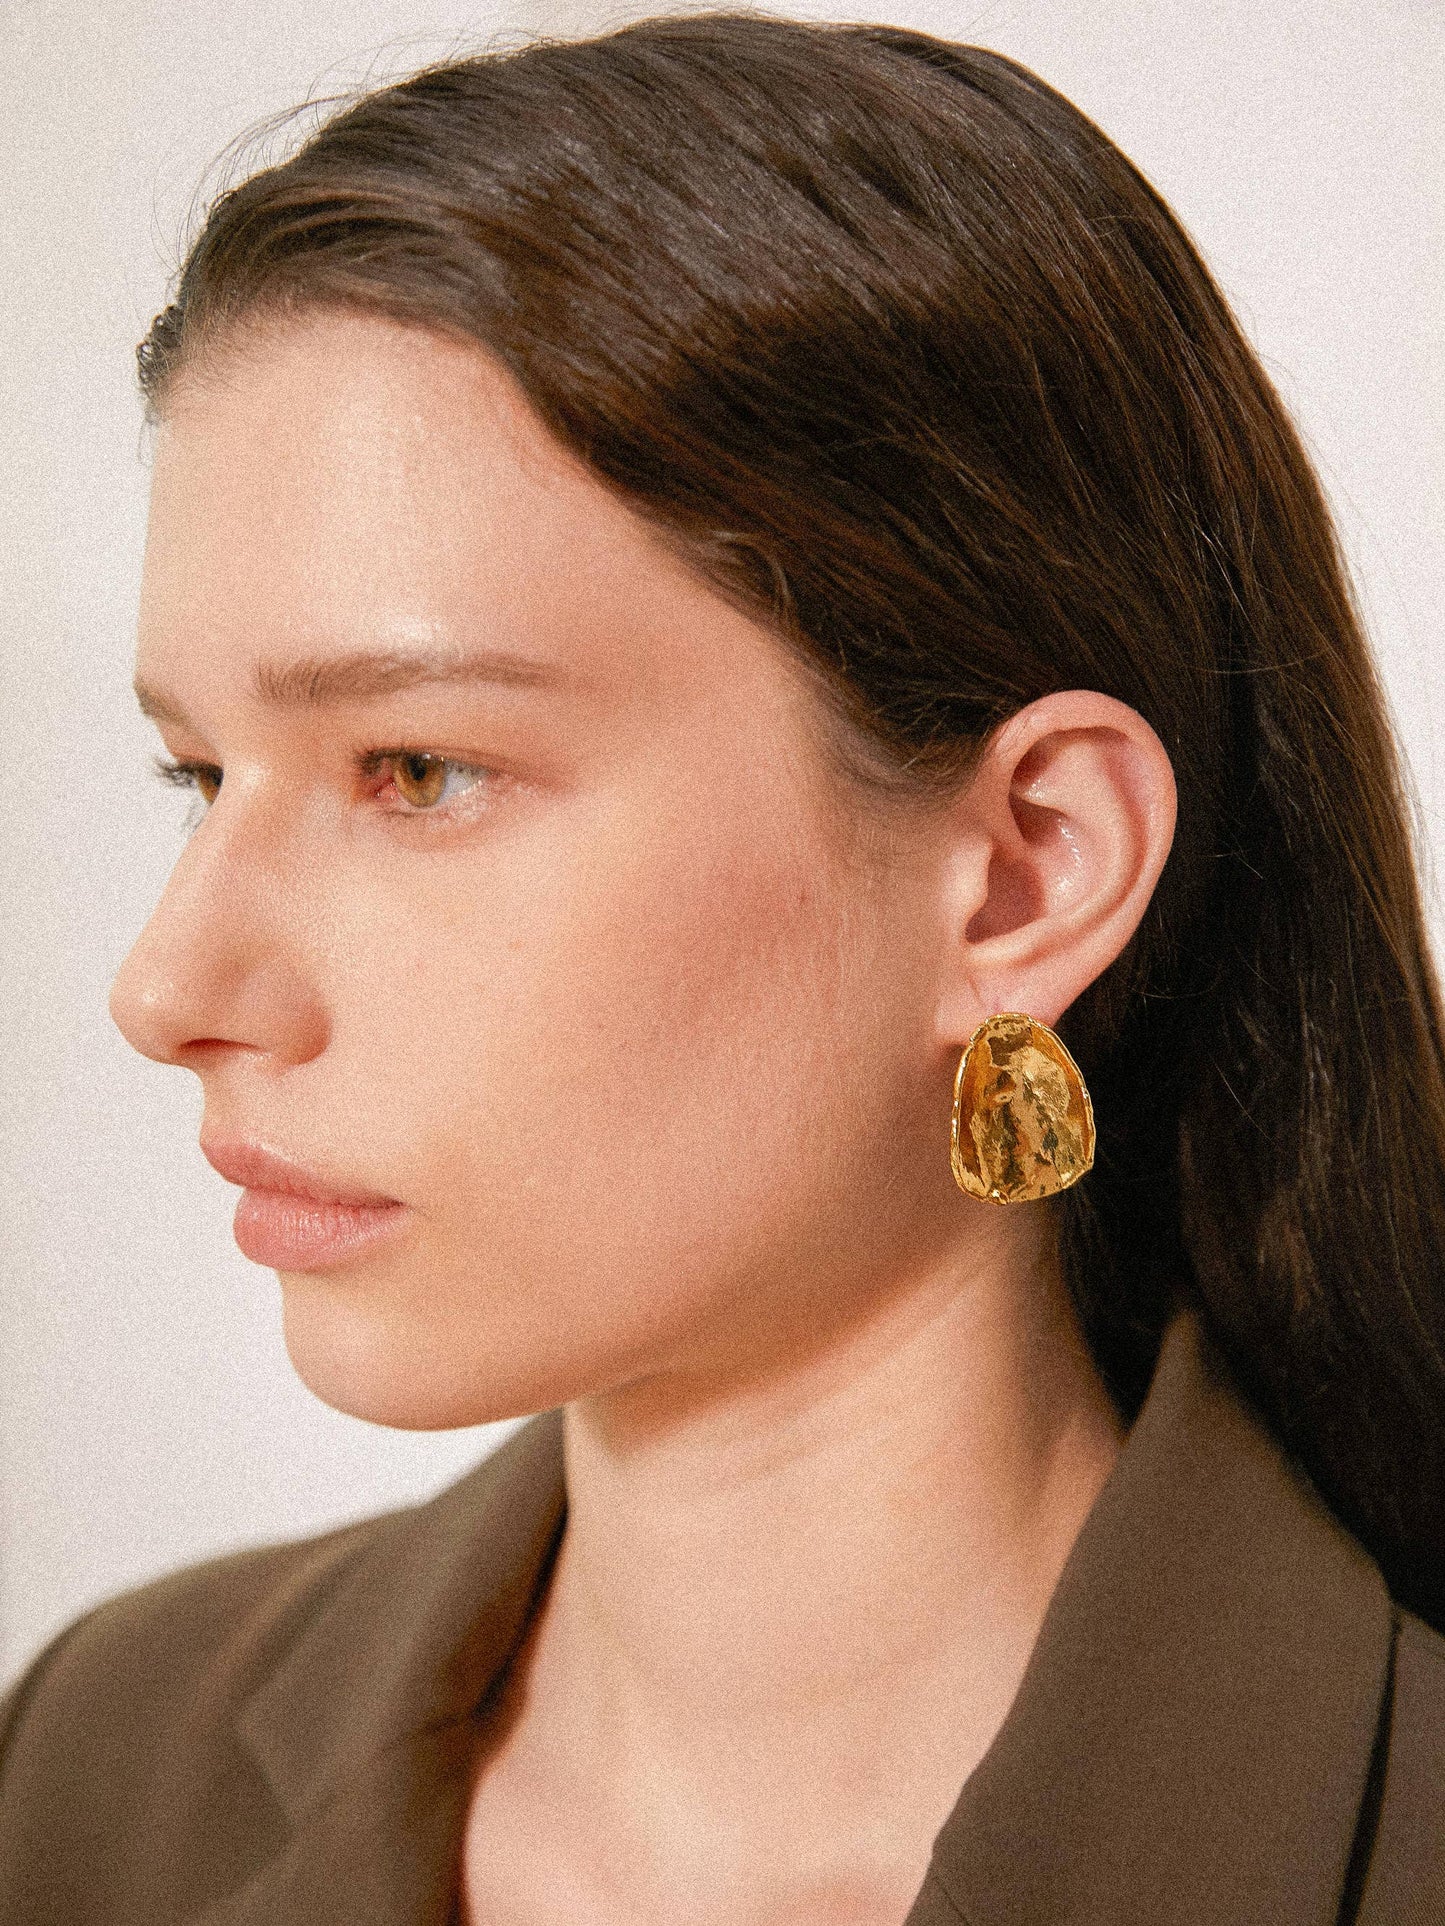 The Alchemist Abstract Oval Statement Stud